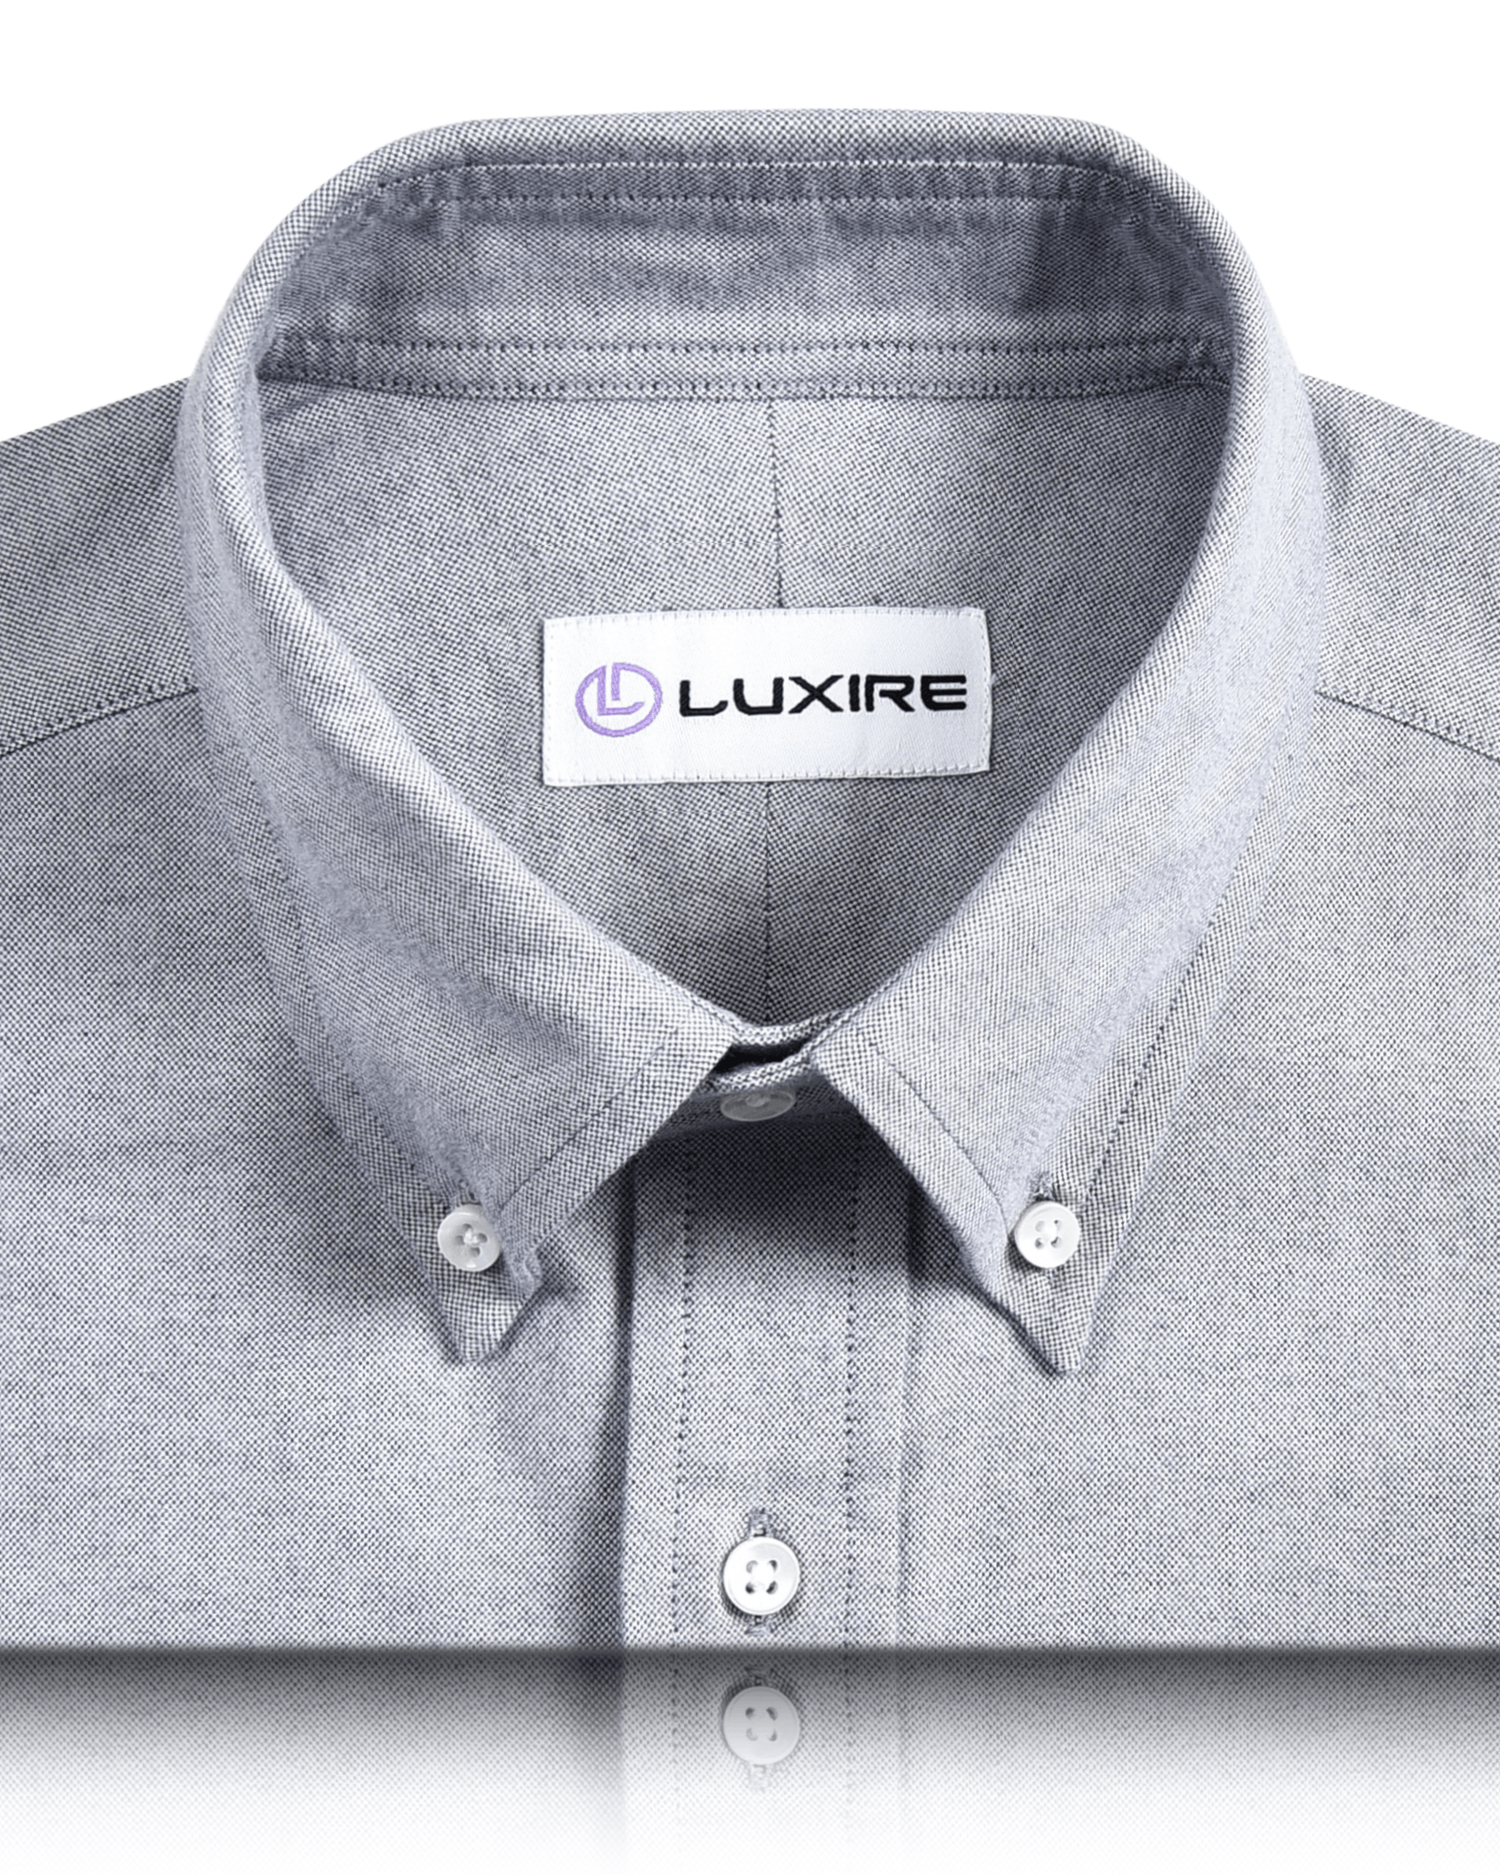 Collar of the custom oxford shirt for men by Luxire in stone grey